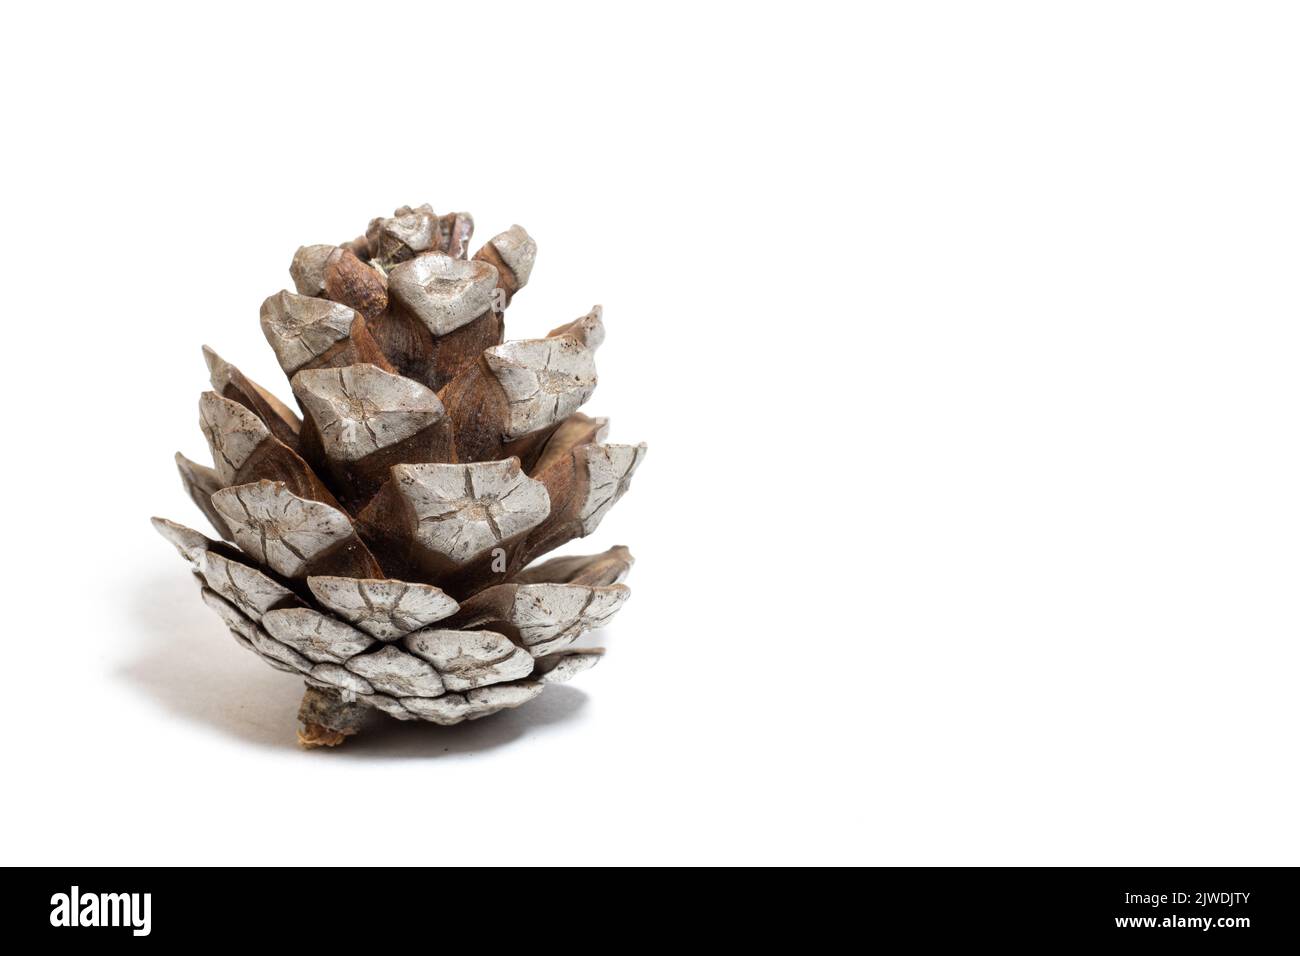 Unpeeled pinecone, dry pine cone isolated on white background. Conifer tree fruit idea concept. Copy space. Horizontal photo. Empty area. No people. Stock Photo